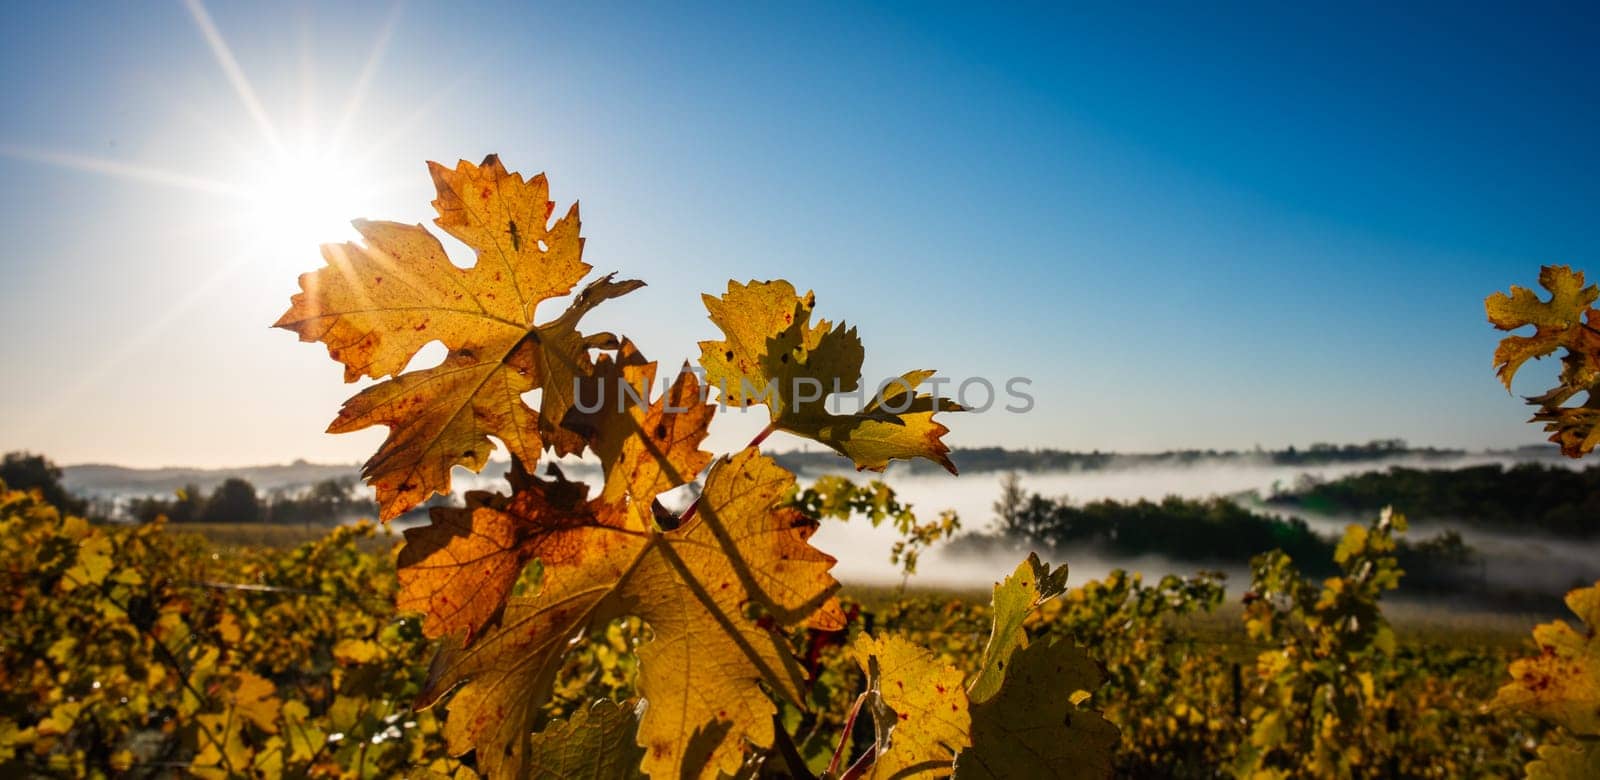 Colourful vine leaves in the autumn, Bordeaux vineyard by FreeProd